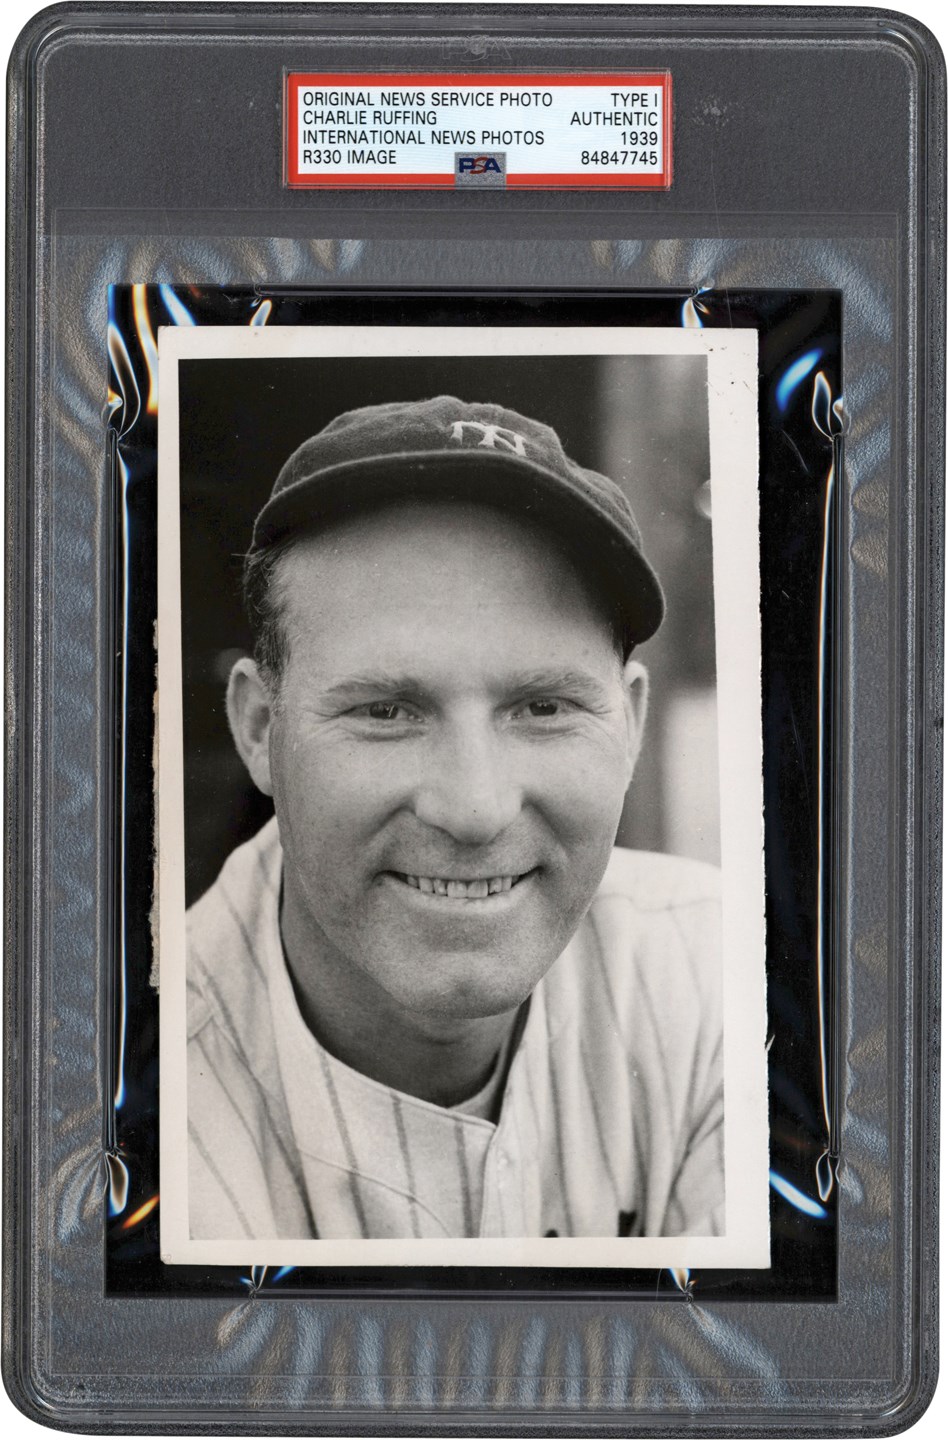 - Red Ruffing Photograph Used For His 1941 Double Play Baseball Card (PSA Type I)